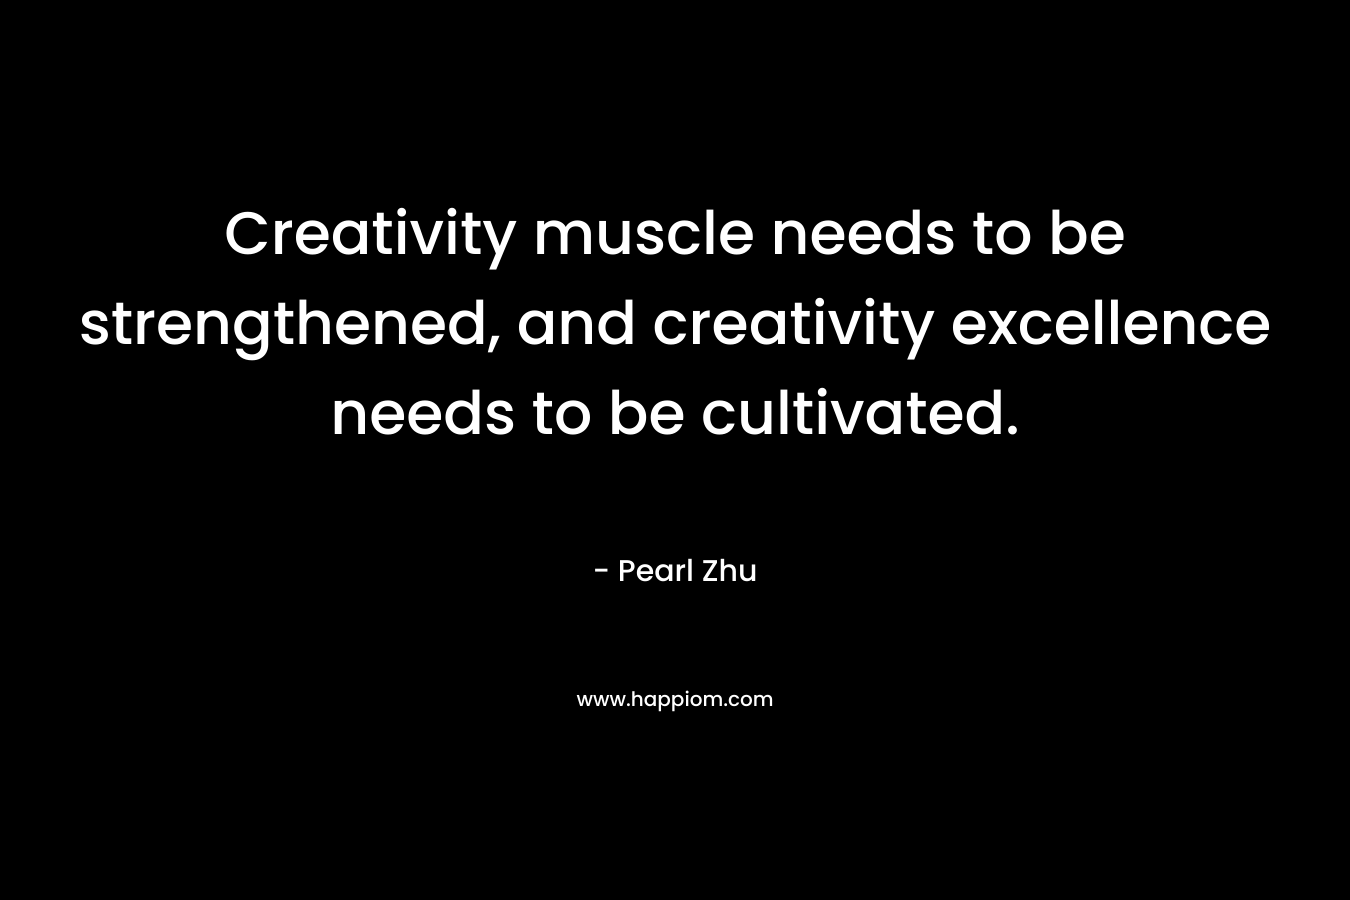 Creativity muscle needs to be strengthened, and creativity excellence needs to be cultivated.